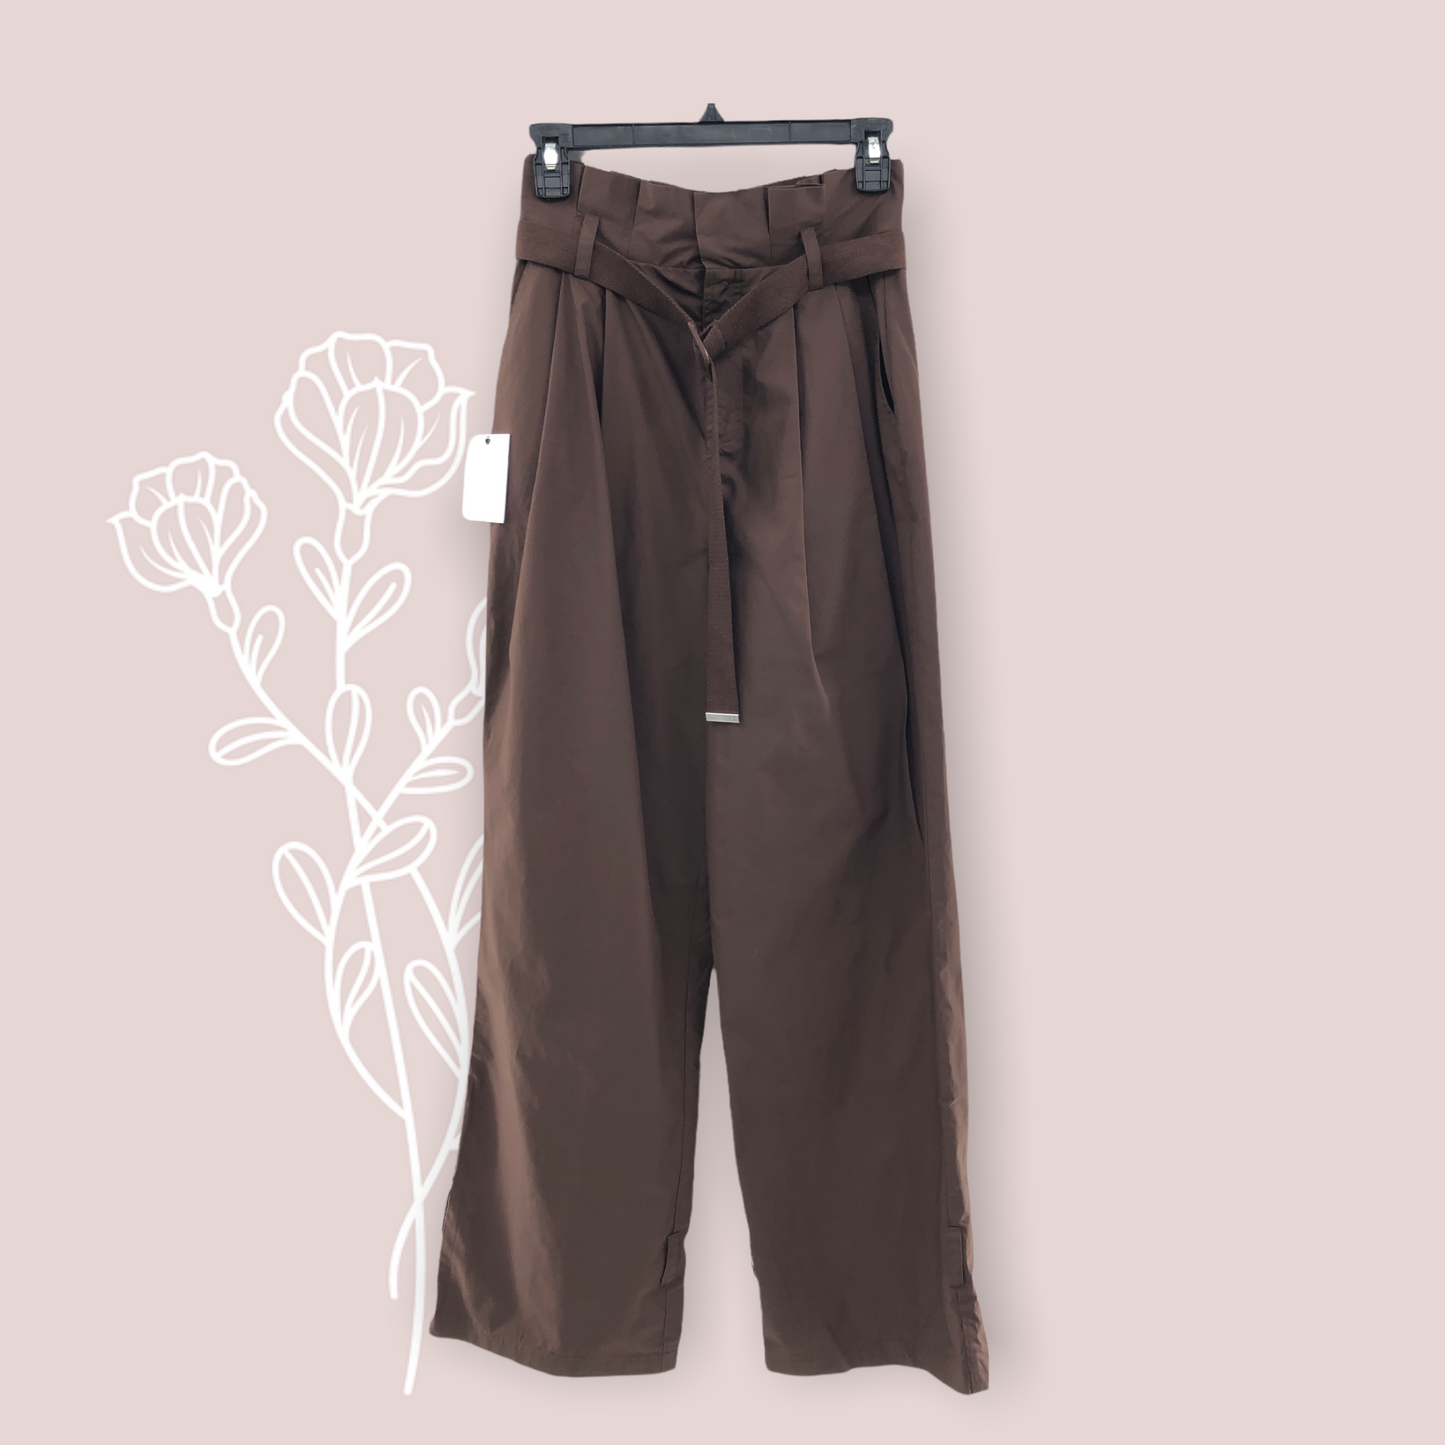 The Virgil Pant in Chocolate BrownL'Academie Wide Leg Small